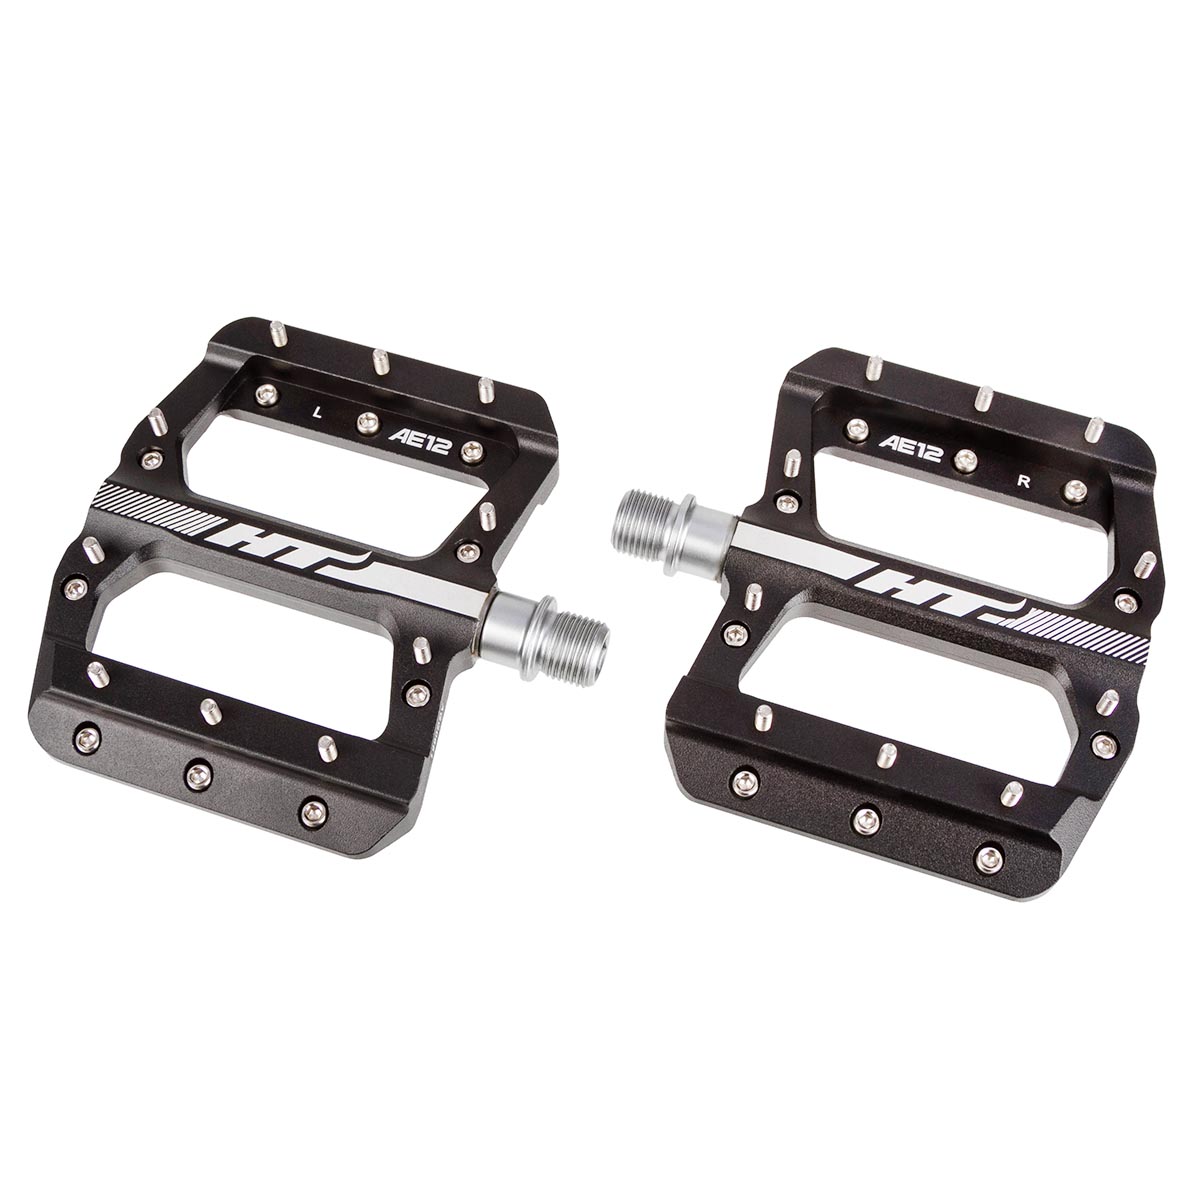 HT Components Pedal AE12 Black